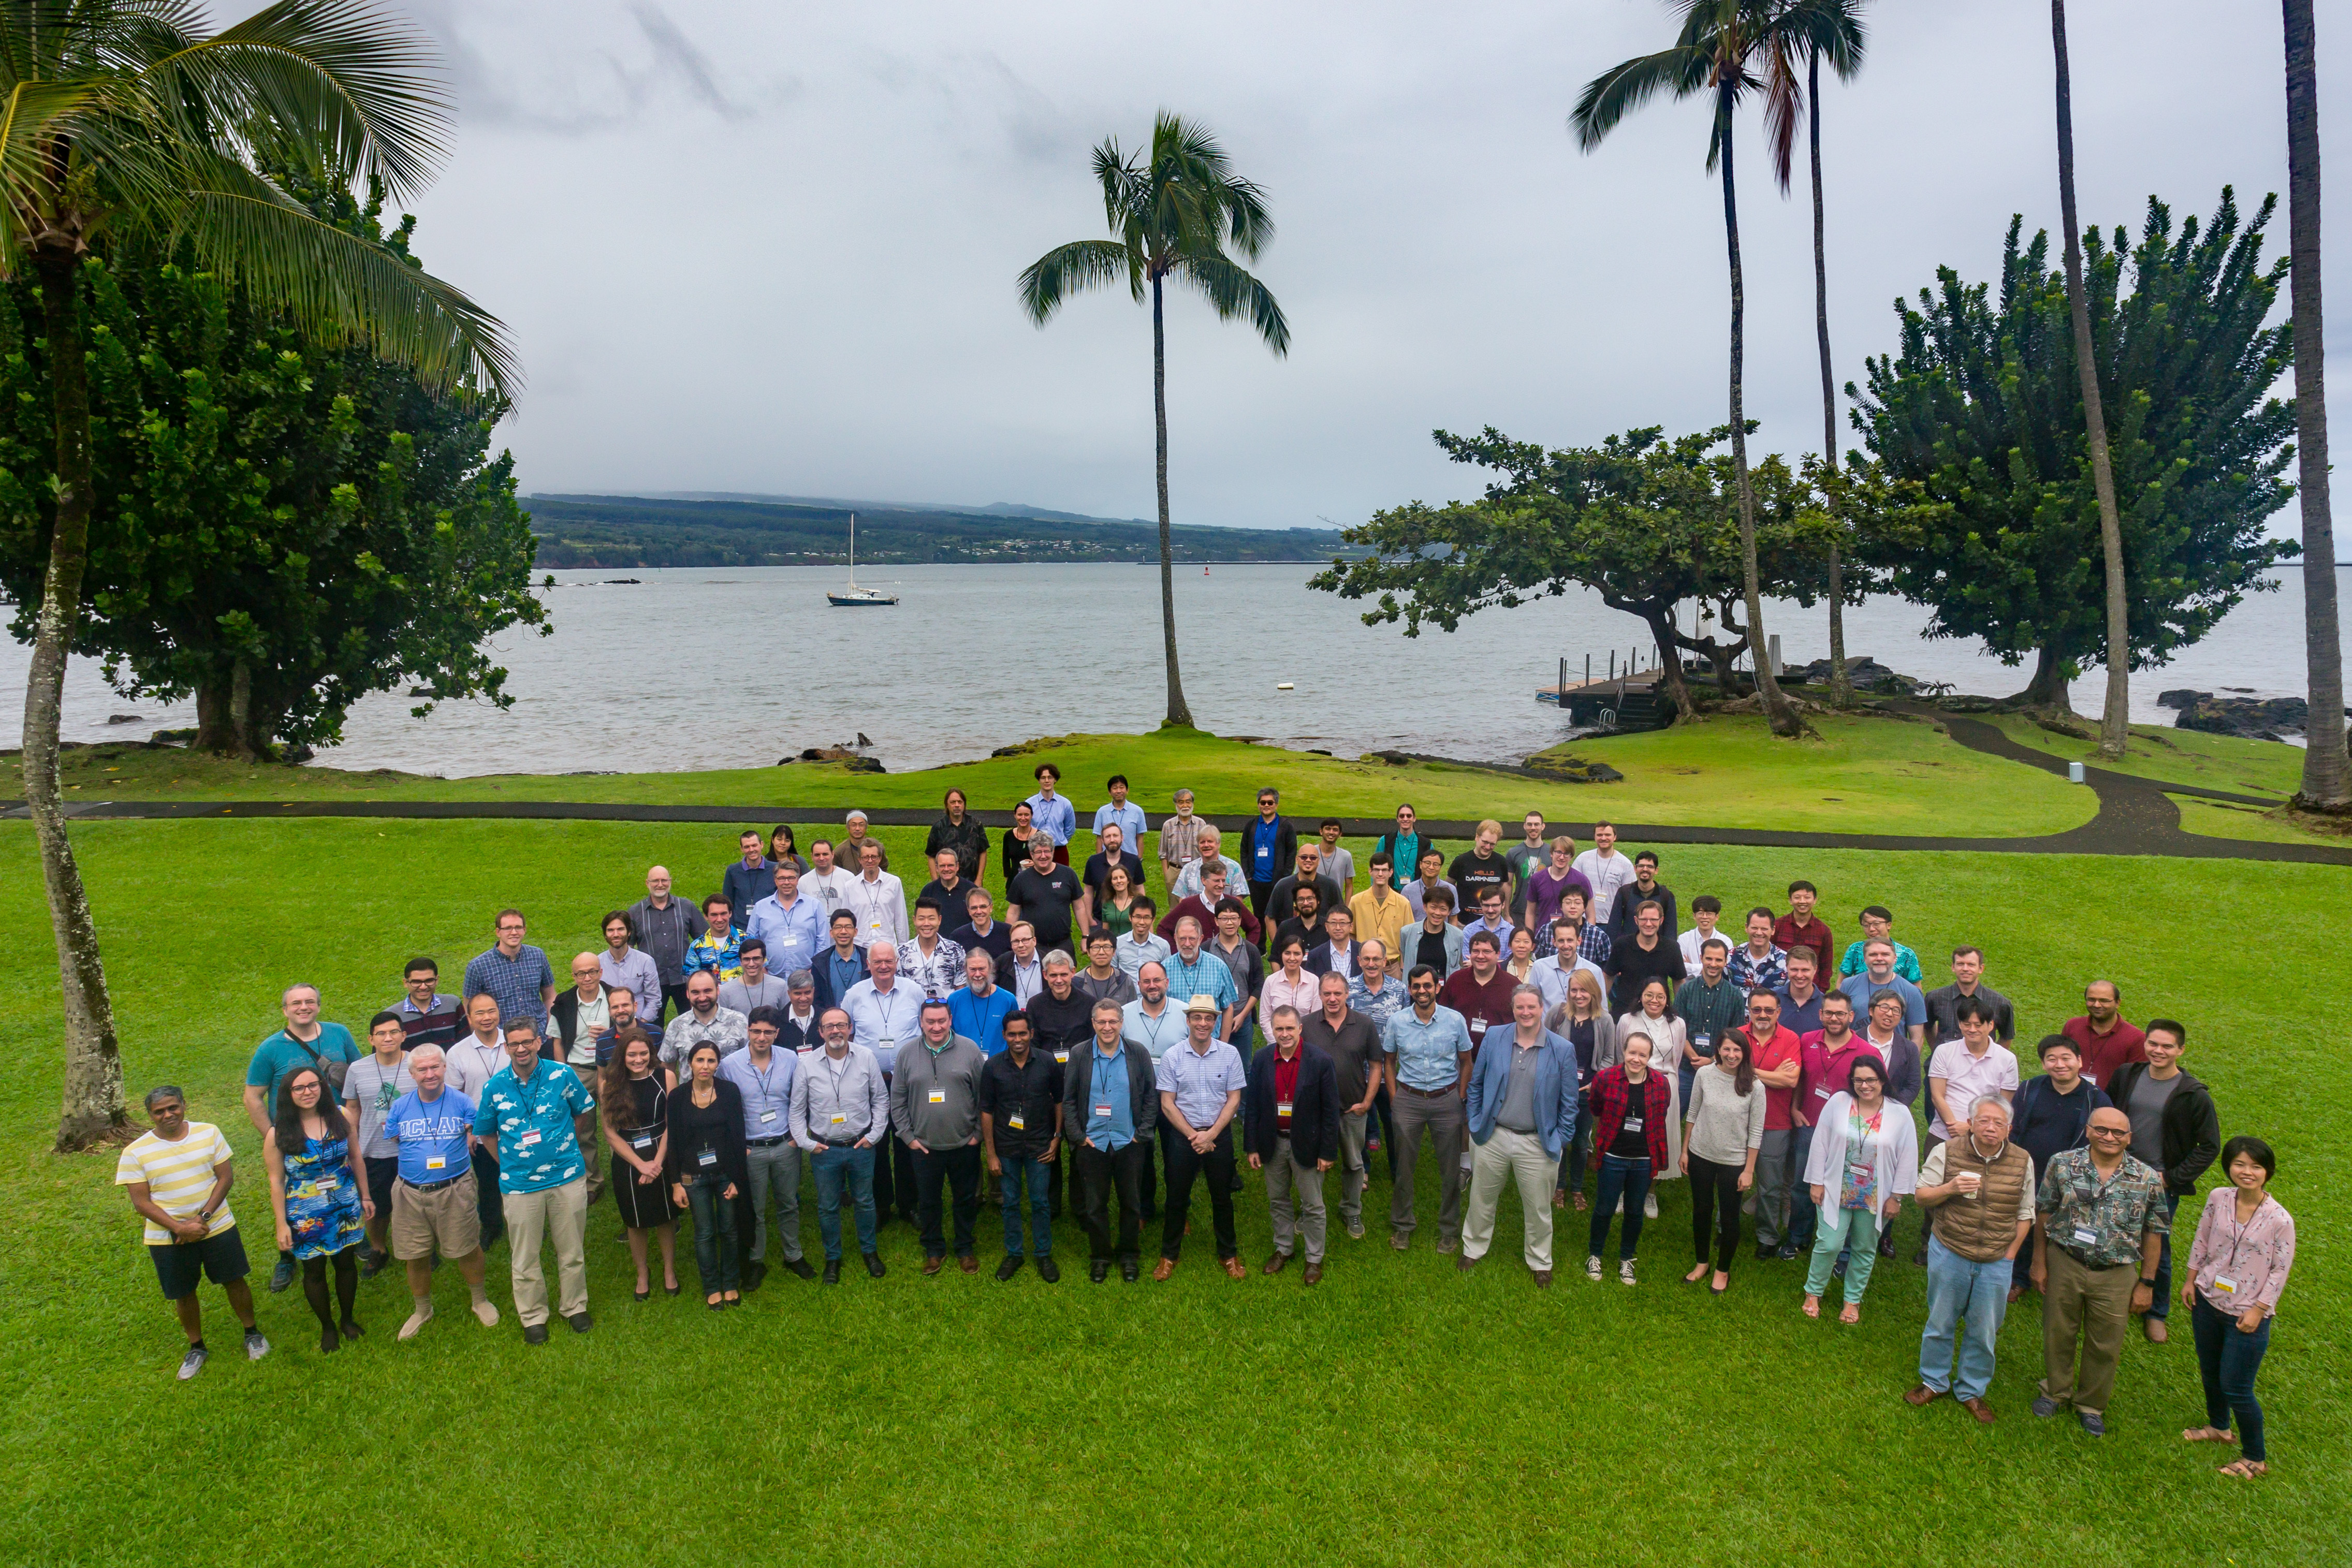 EHT collaboration team group photo on the lawn with palm trees and ocean in background